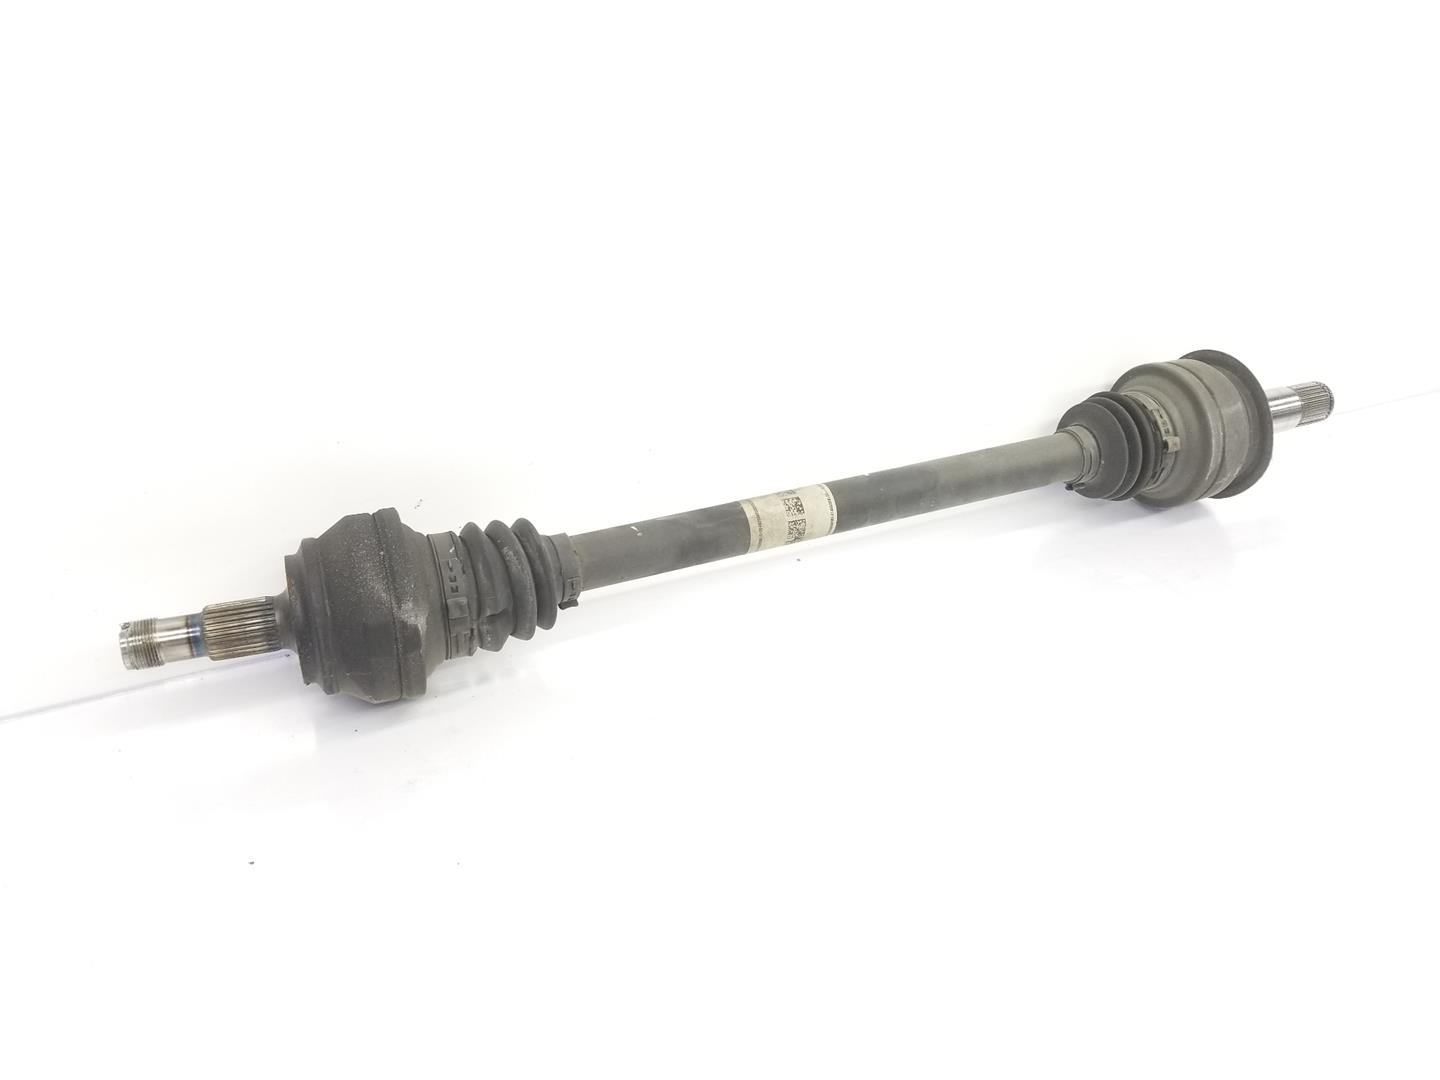 MERCEDES-BENZ GLC Coupe (C253) (2016-present) Rear Right Driveshaft A2133502611, A2133502611 24121532